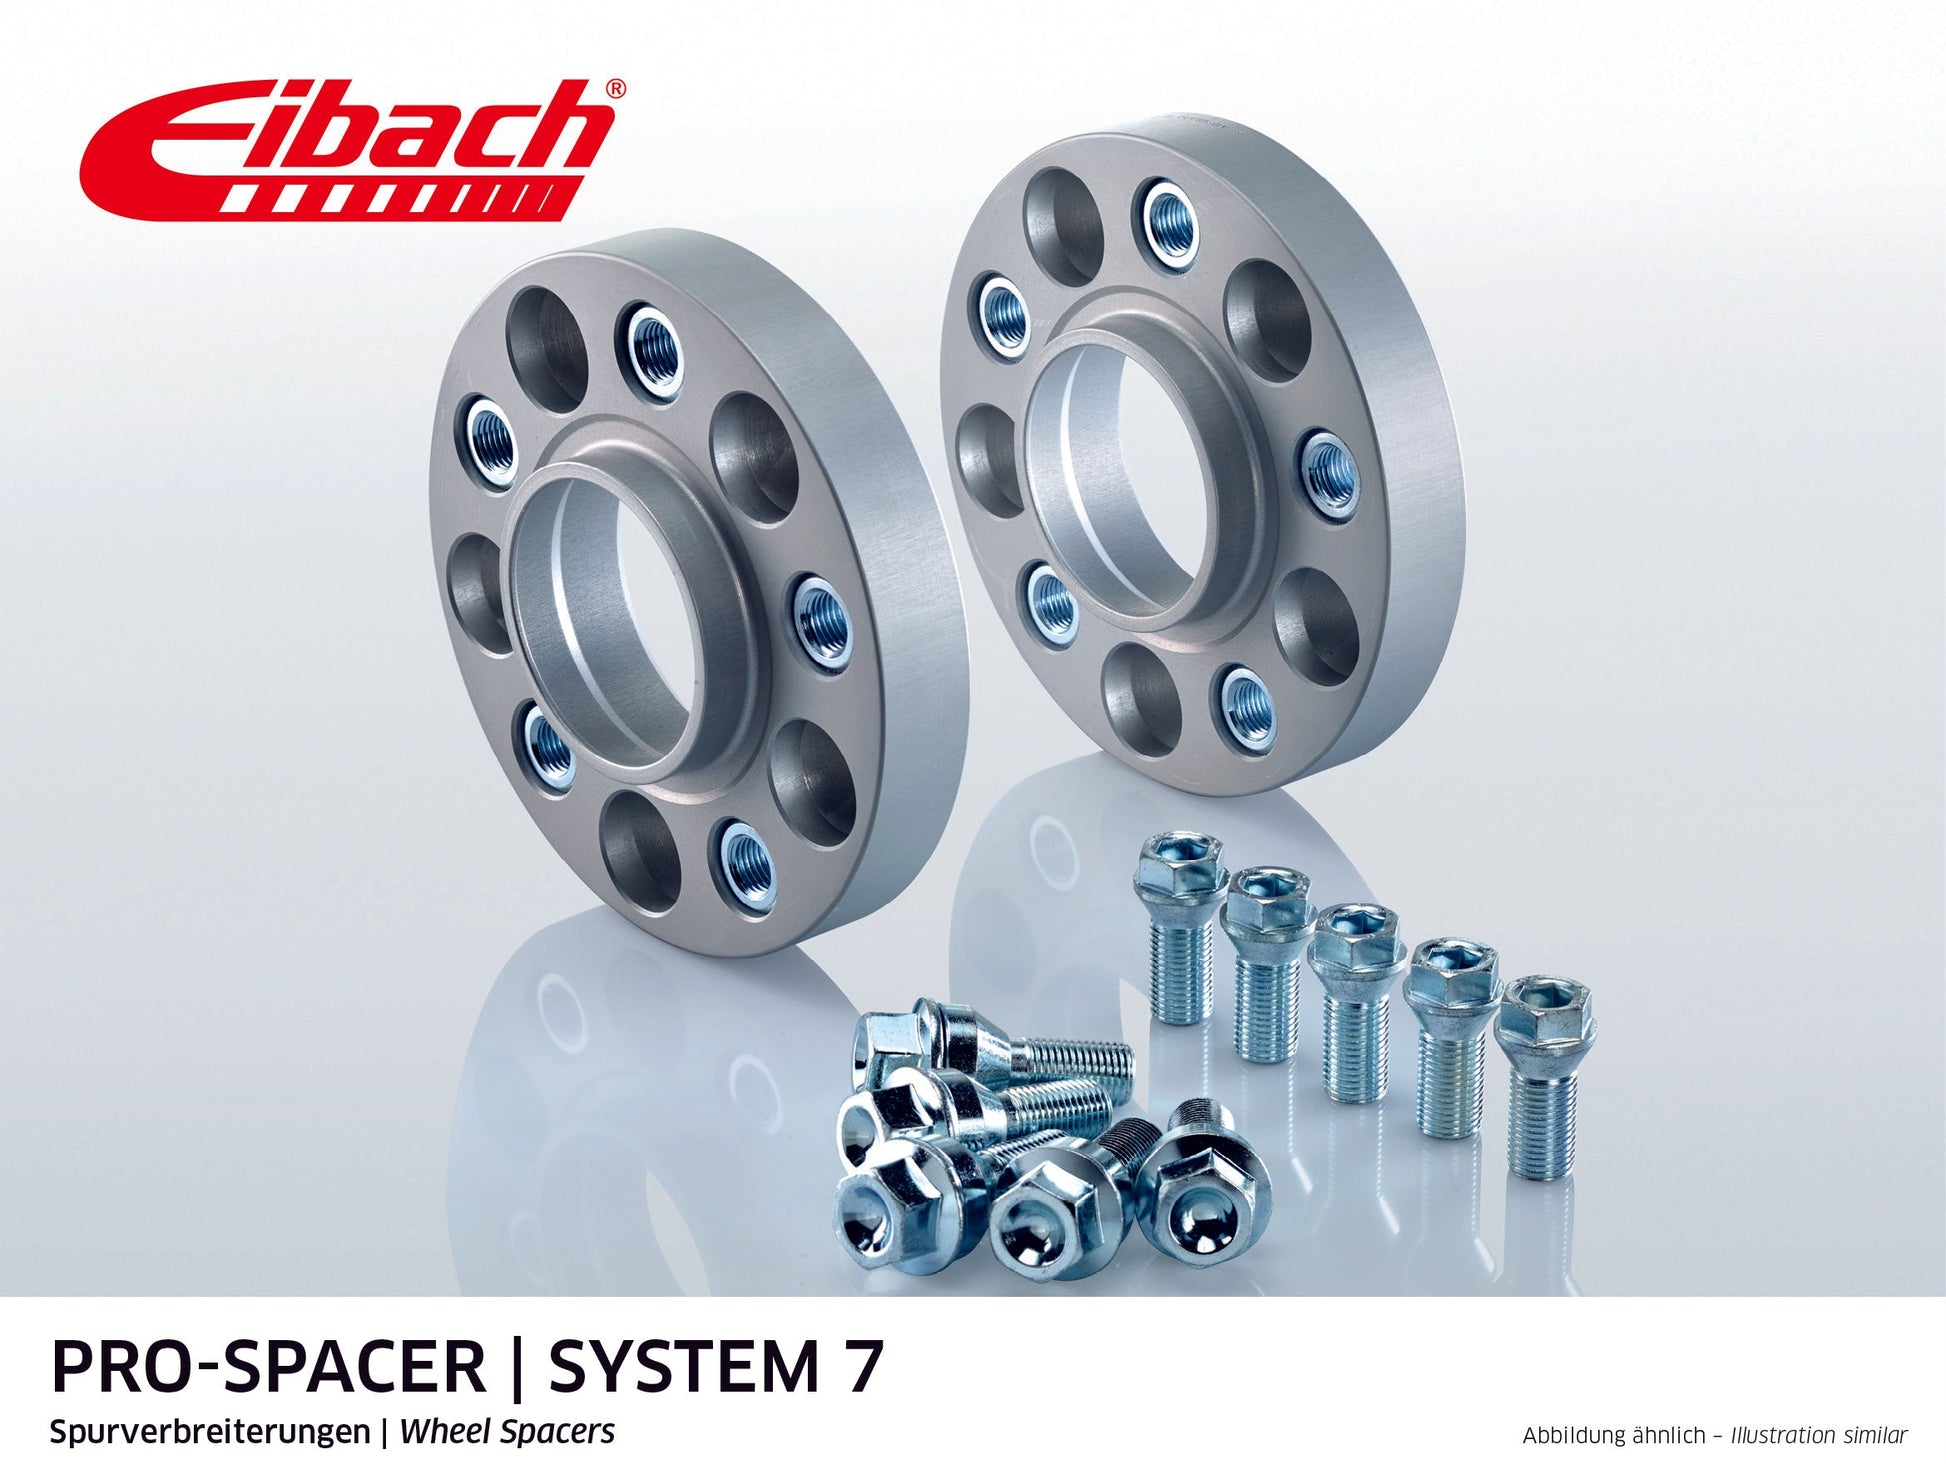 Eibach Pro-Spacer Kit (Pair Of Spacers) 30mm Per Spacer (System 7) S90-7-30-011 (Silver) at £175.85